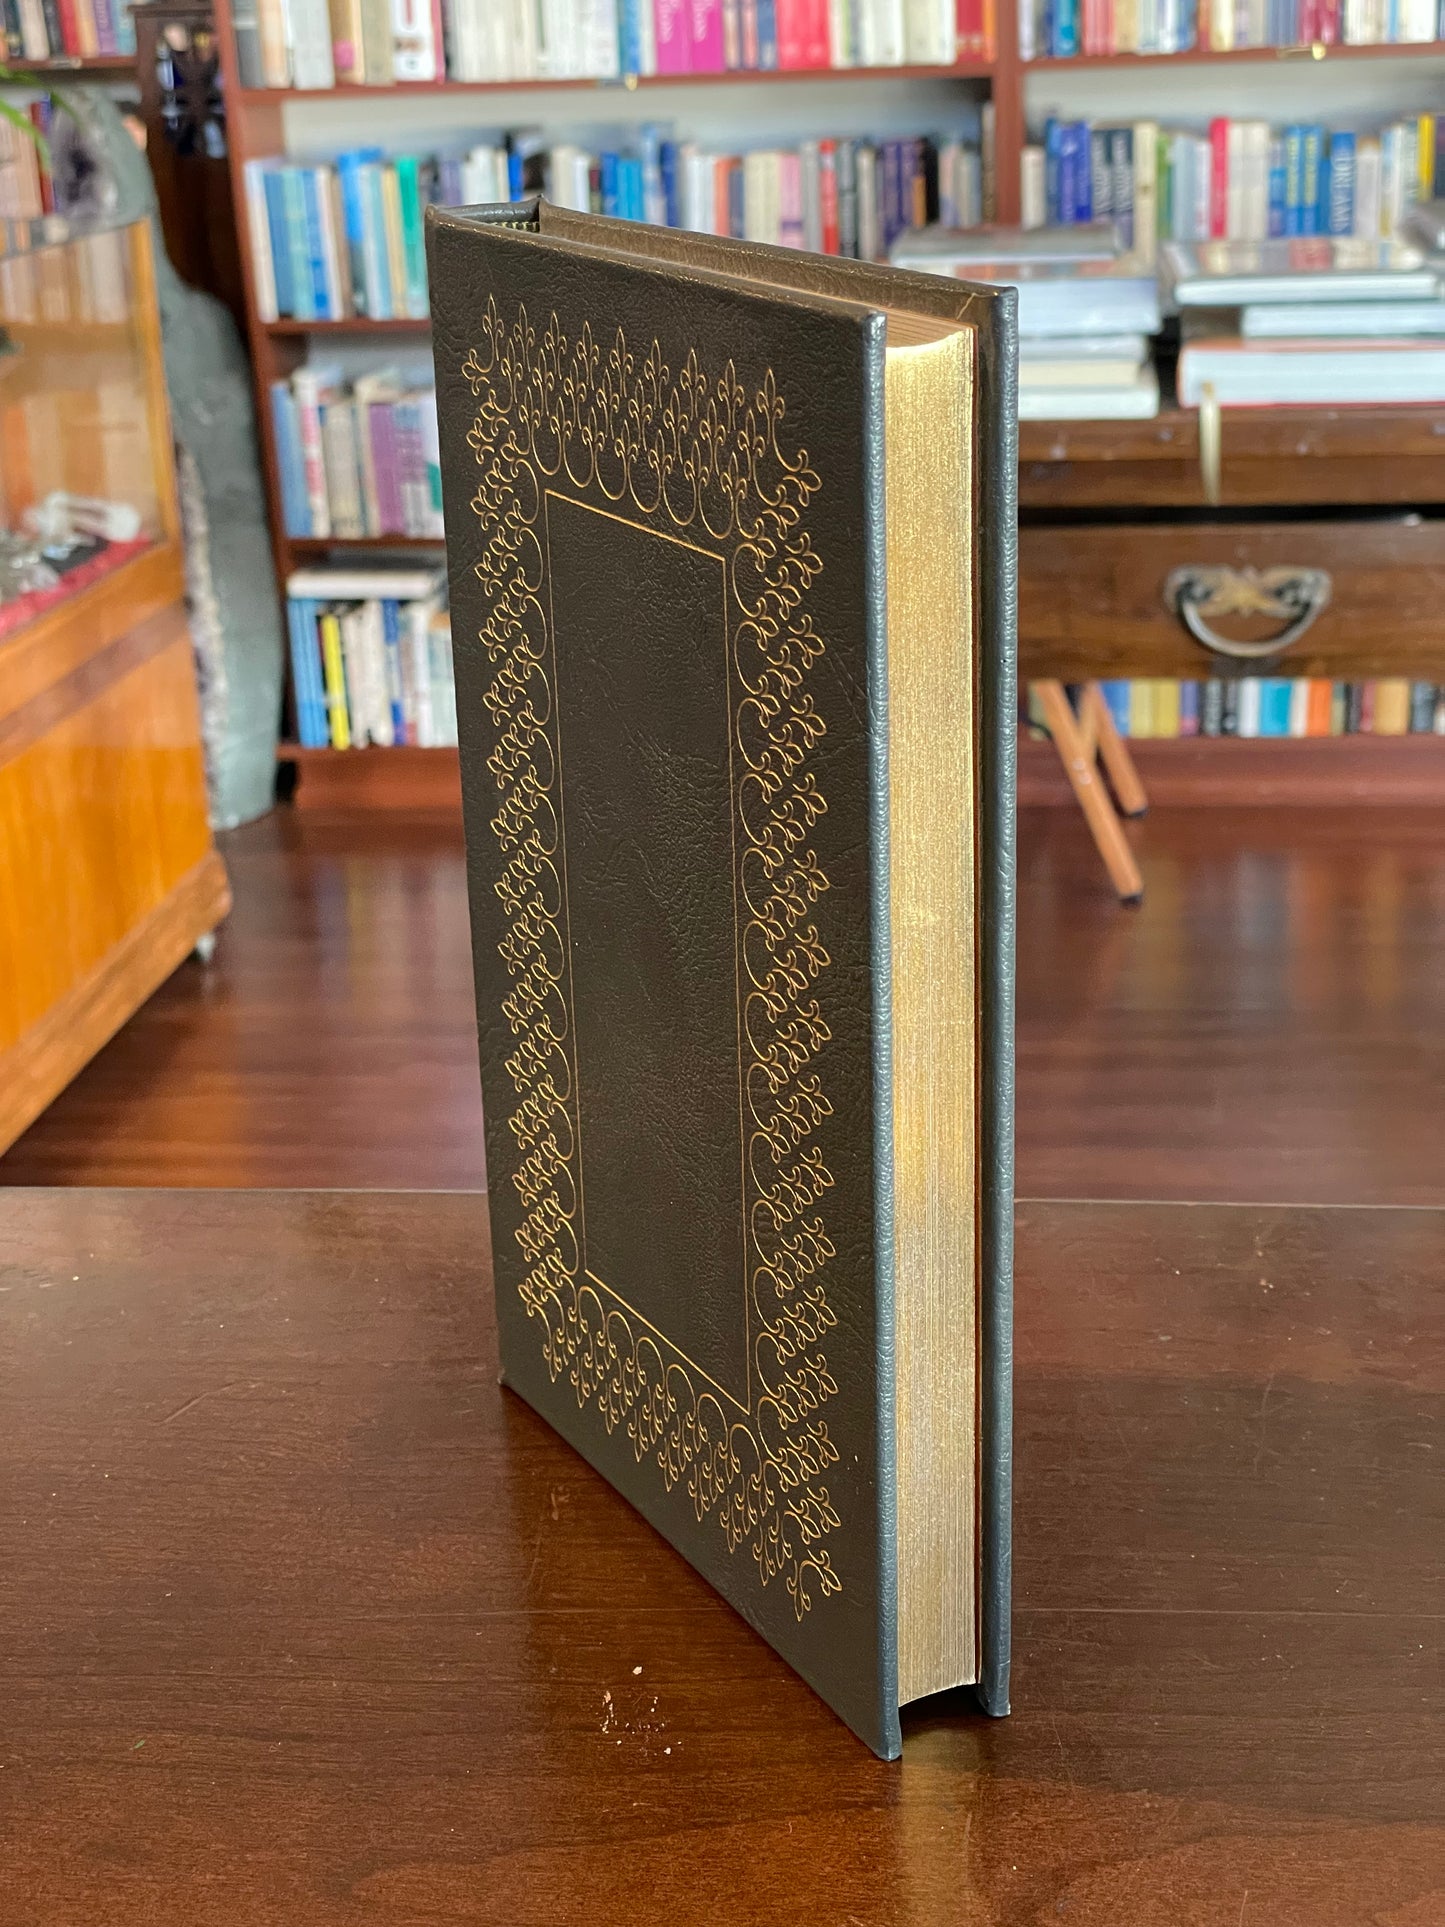 Candide by Voltaire (Easton Press)